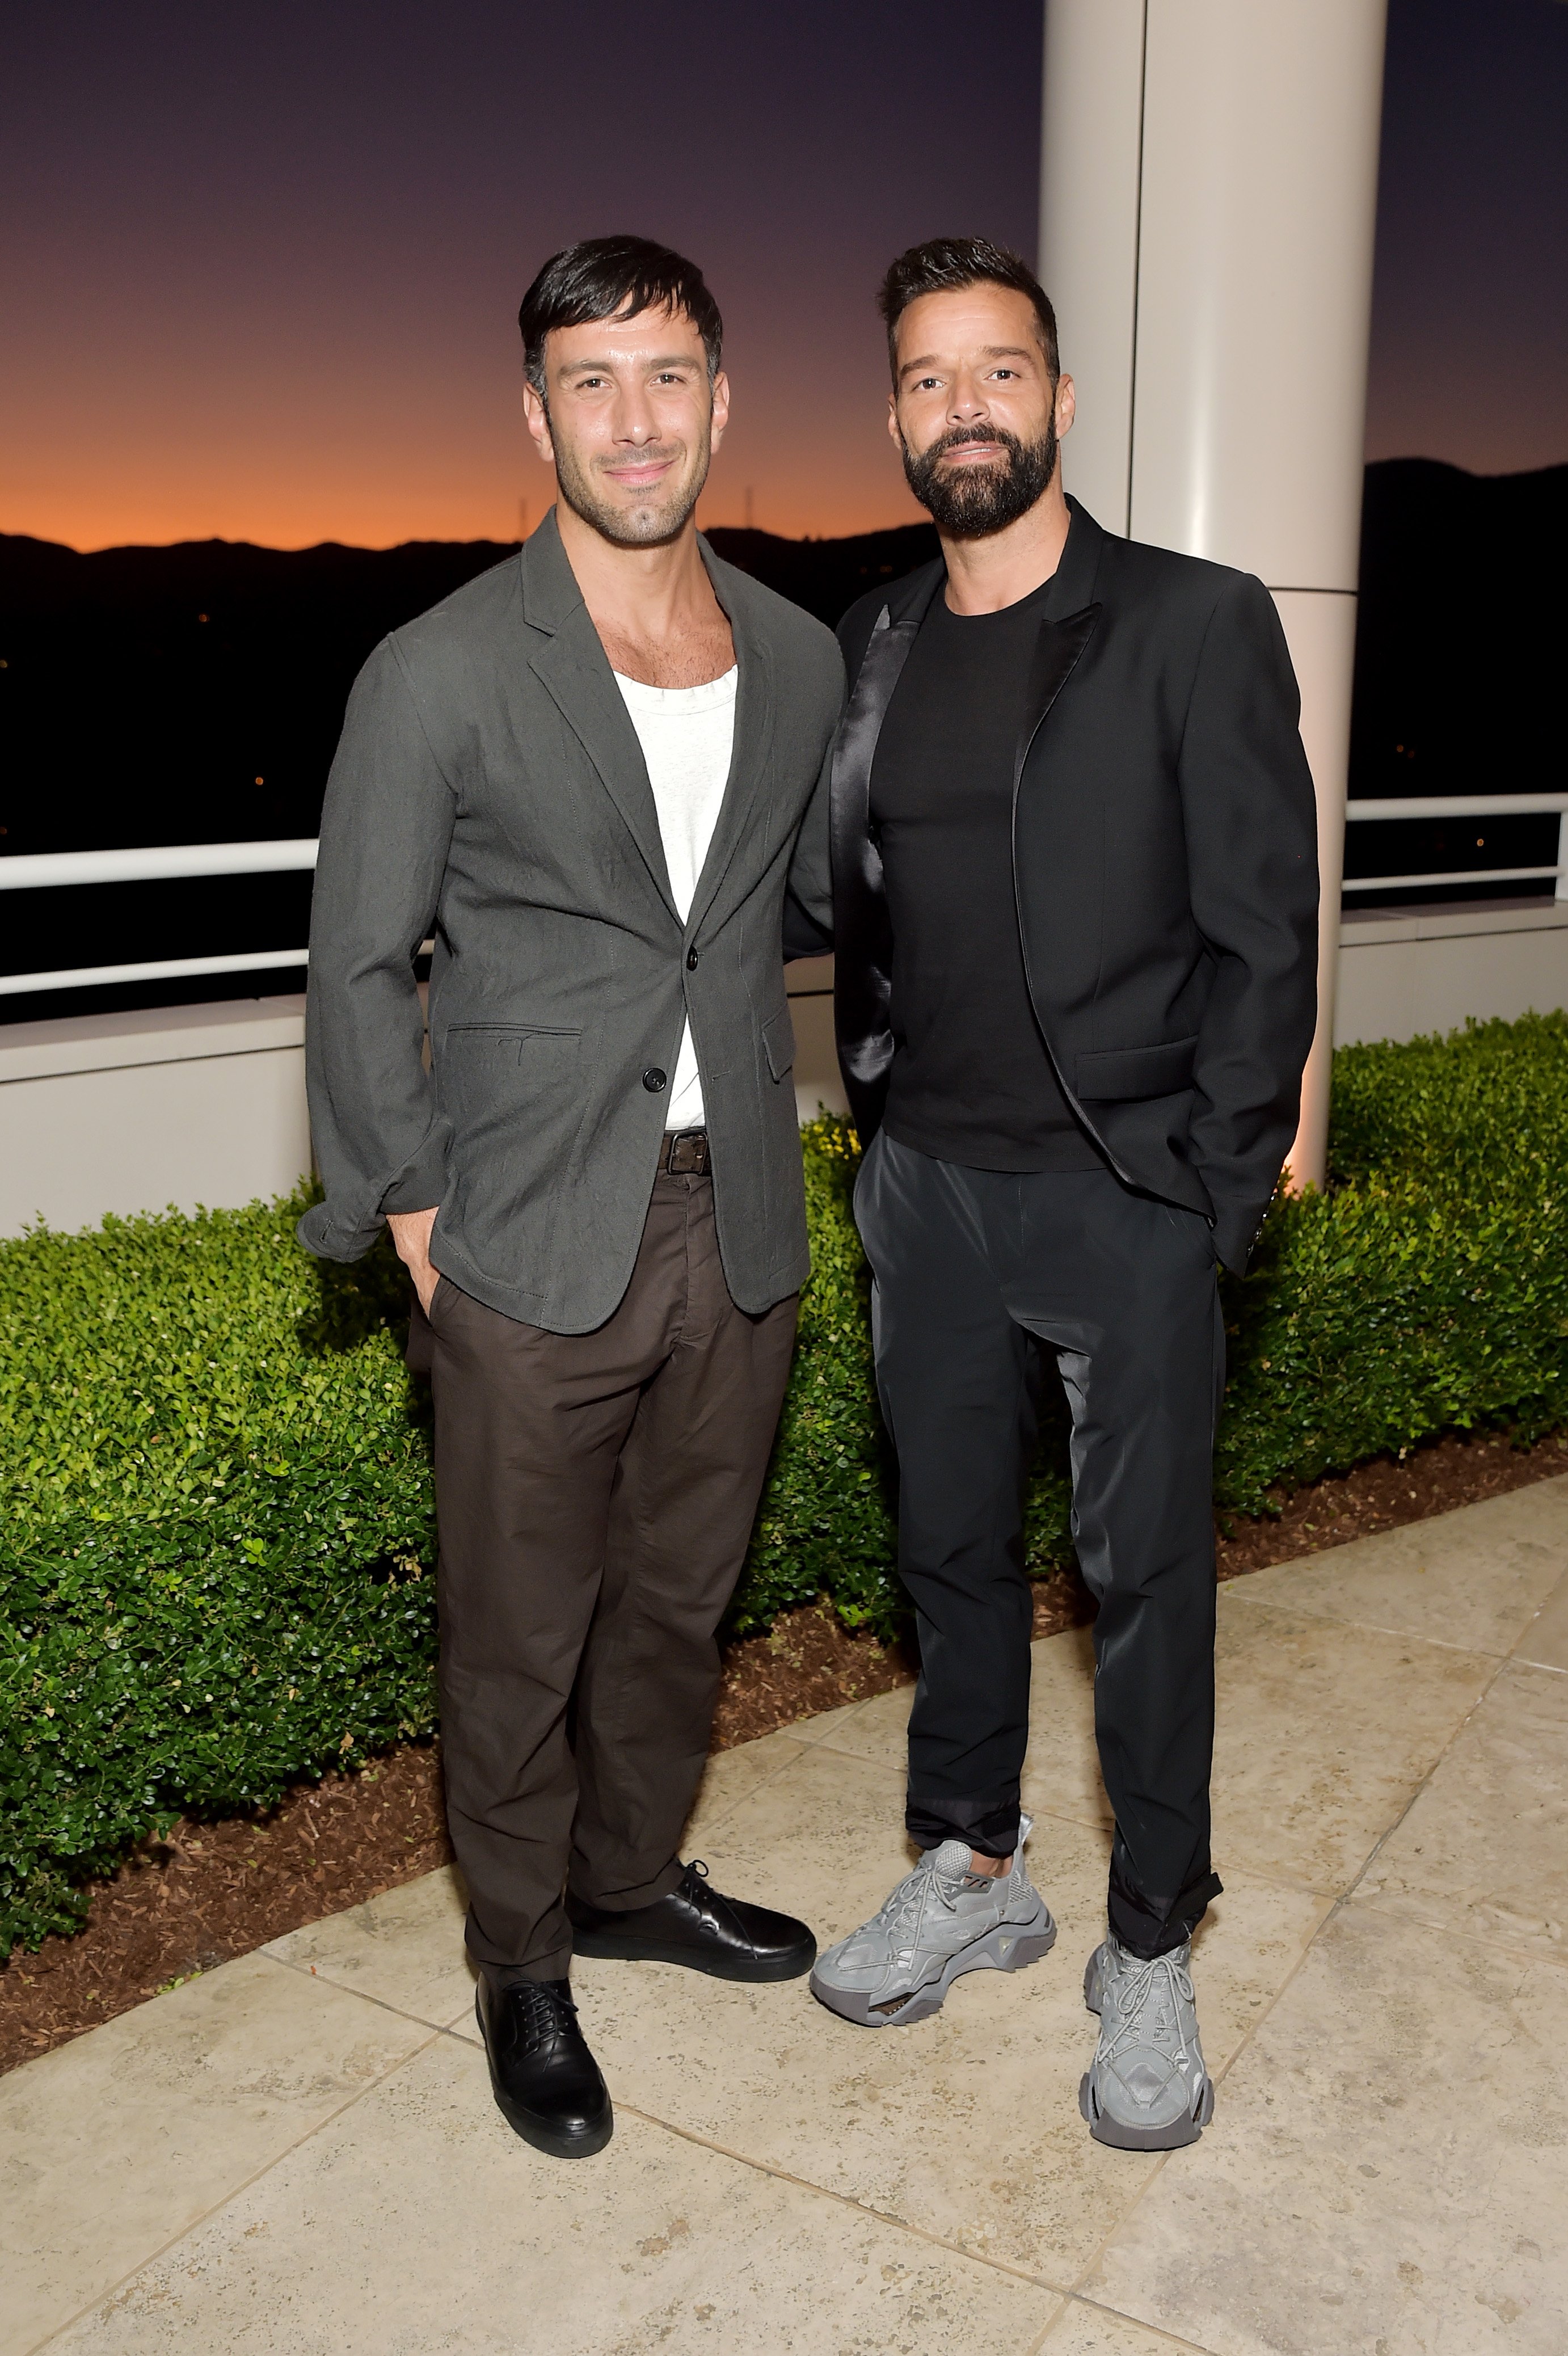 wan Yosef and Ricky Martin attend The J. Paul Getty Medal Dinner on September 16, 2019 in Los Angeles, California. | Source: Getty Images.